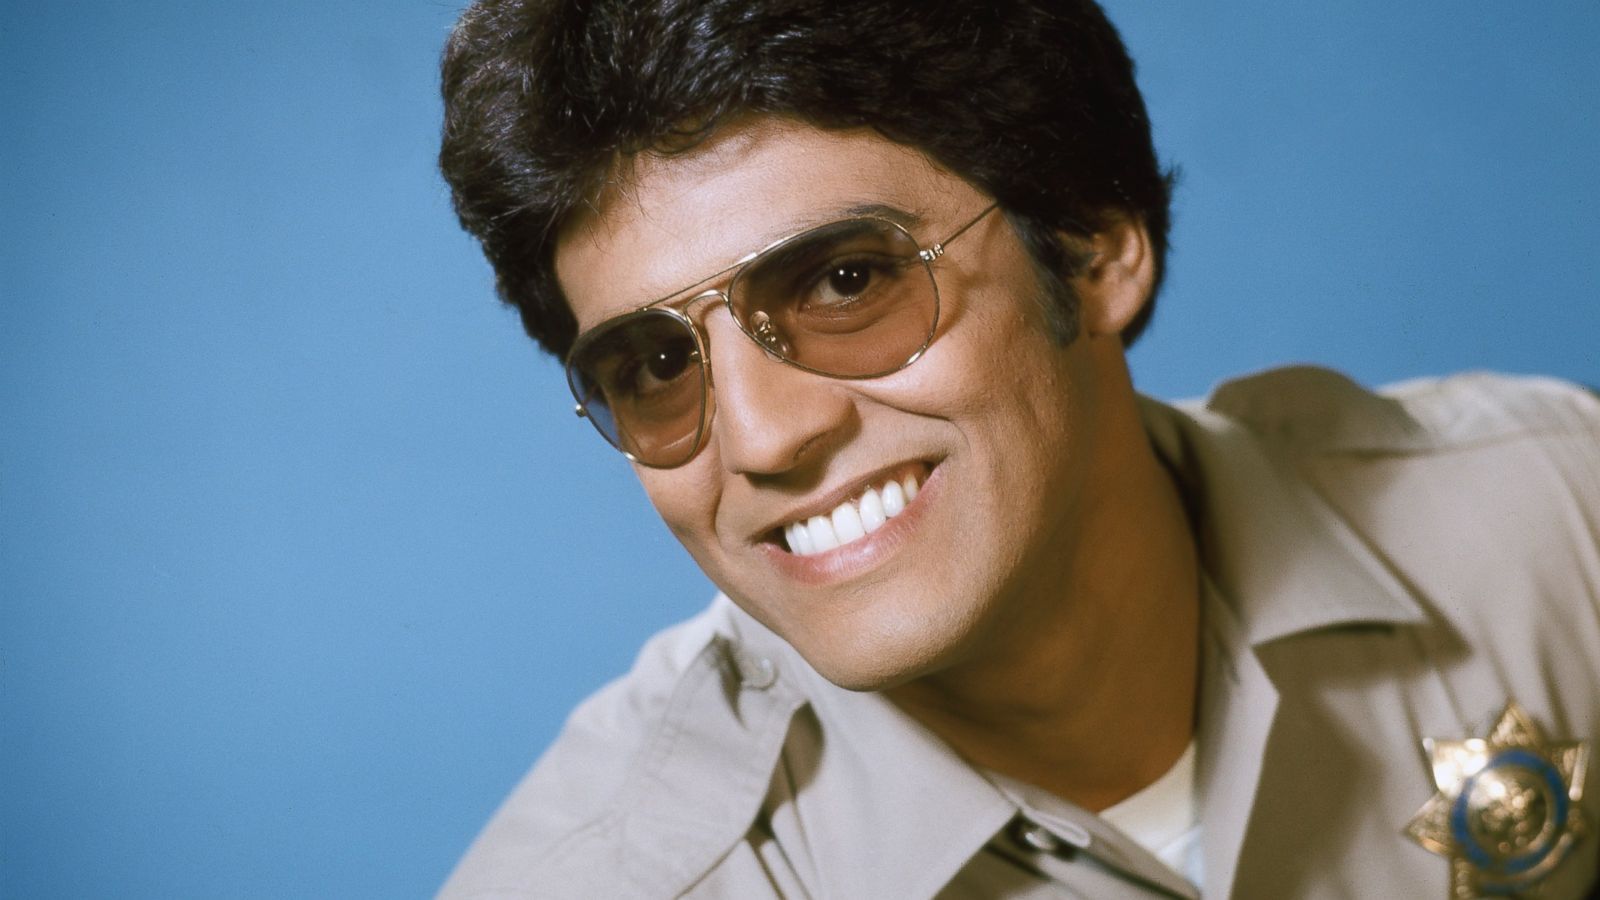 Things You Never Knew About 'CHiPs' and Erik Estrada